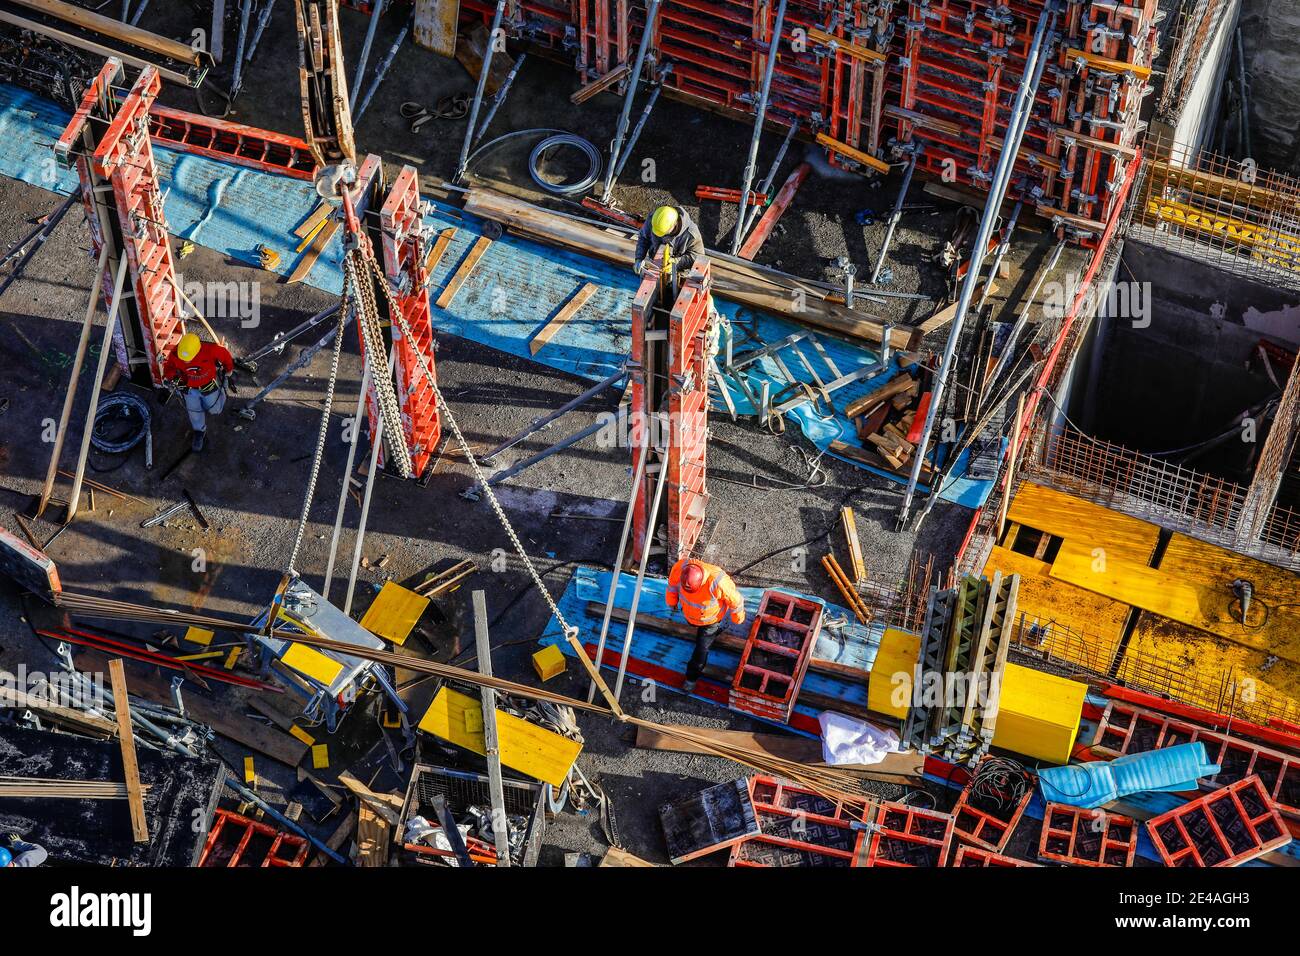 Oberhausen, Ruhr area, North Rhine-Westphalia, Germany - construction workers are working on a concrete formwork on a construction site. Stock Photo